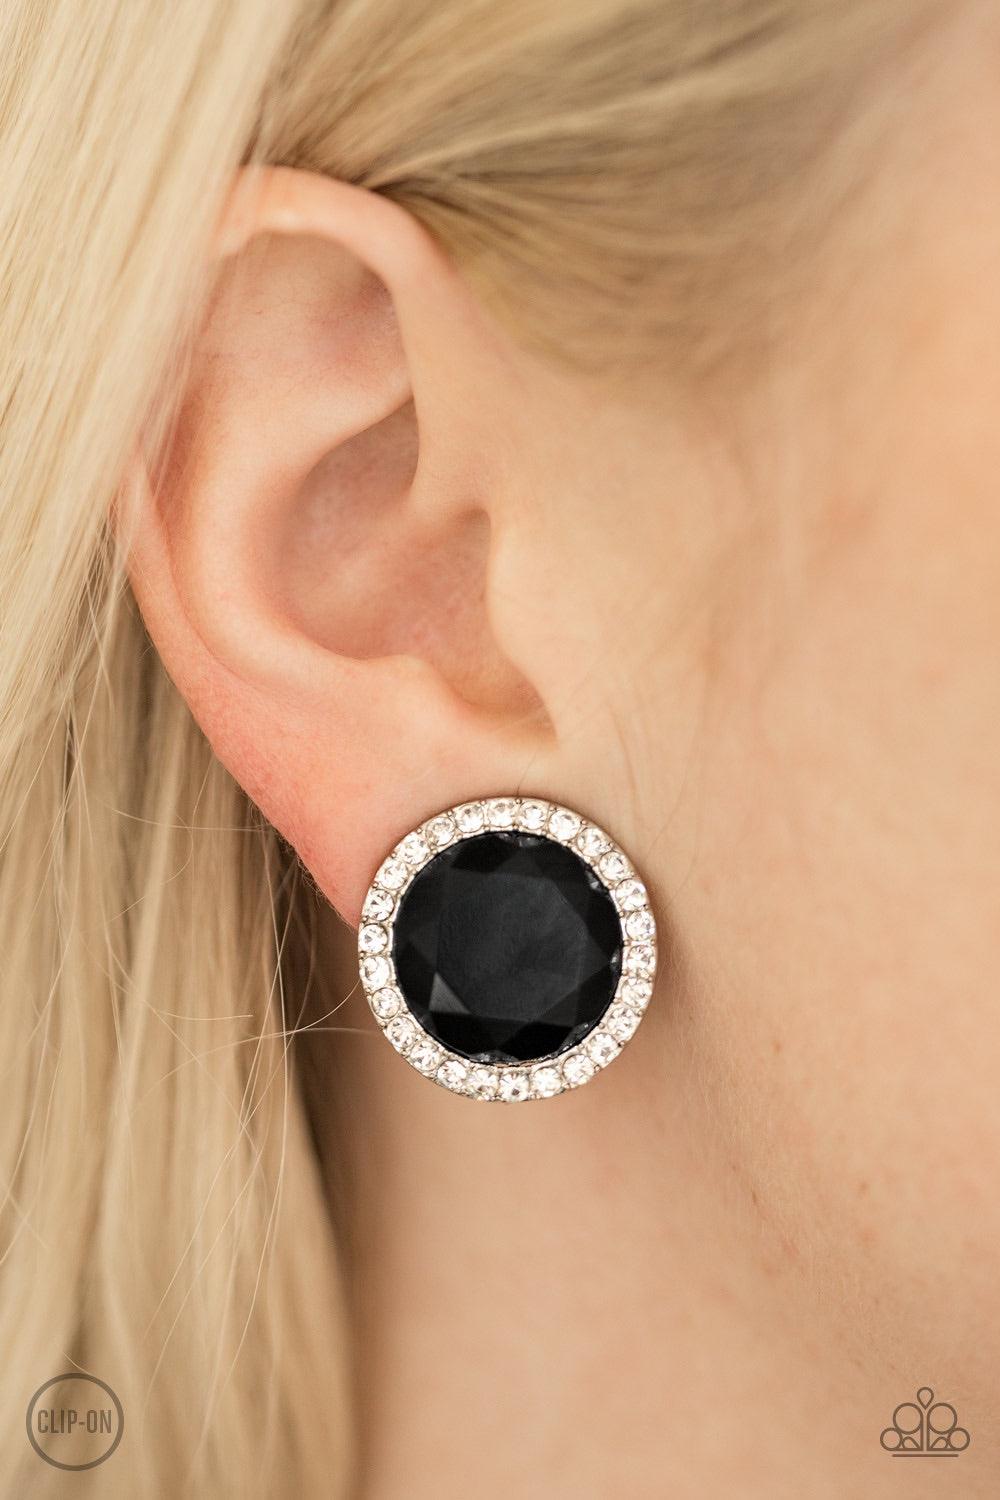 Paparazzi Accessories Positively Princess ~Black *Clip-On A glassy black gem is pressed into the center of a white rhinestone encrusted frame for a timeless look. Earring attaches to a standard clip-on fitting.